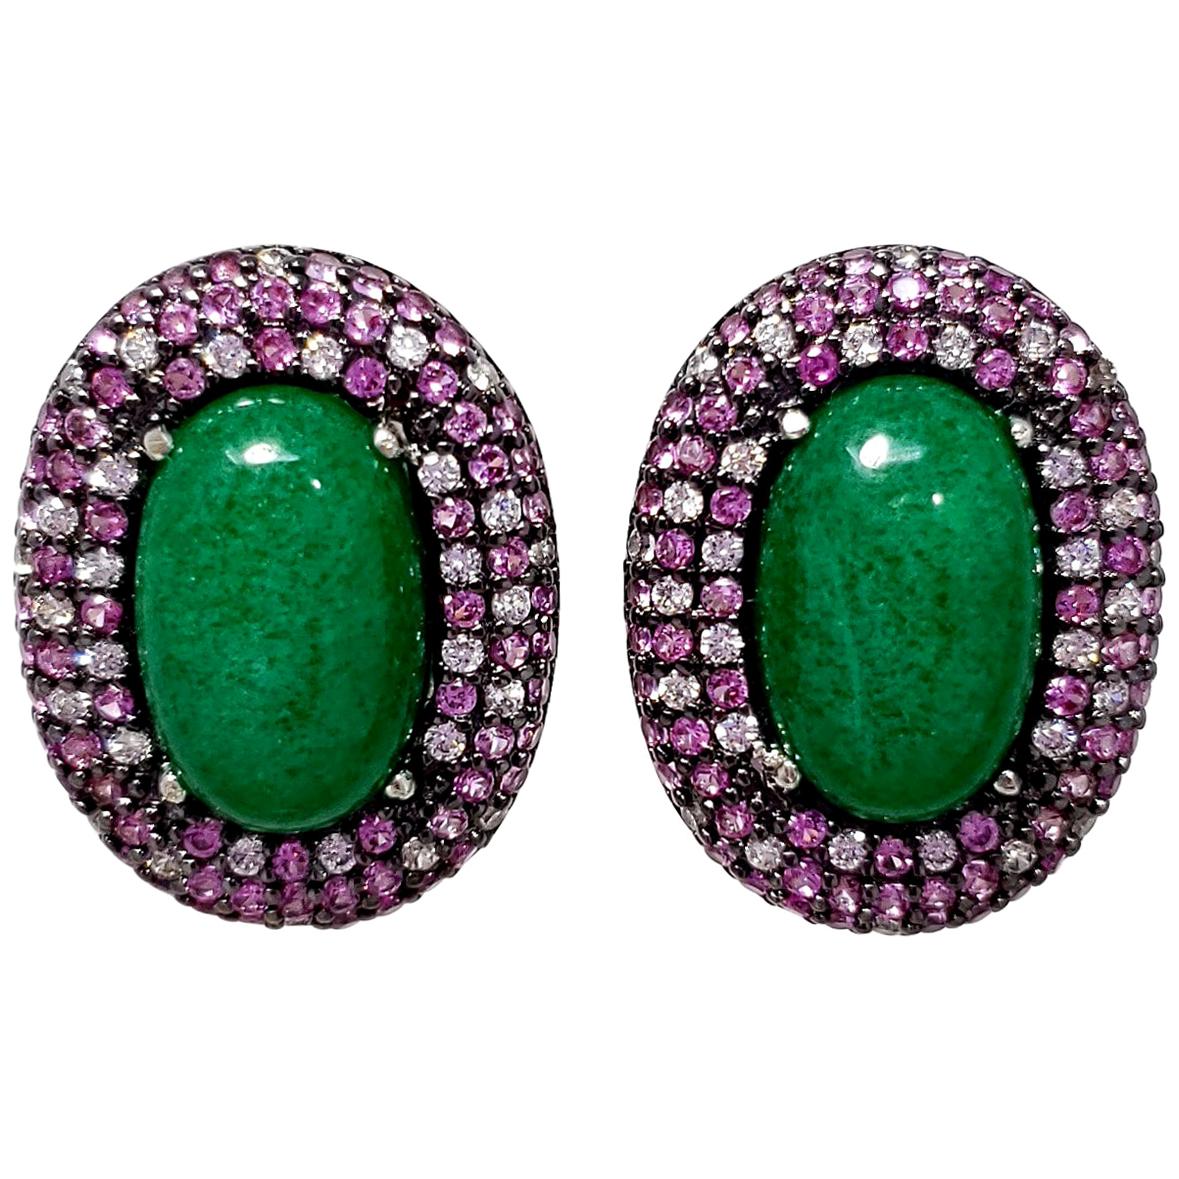 Kenneth Jay Lane CZ KJL Green Cabochon and Rose Cubic Zirconia Clip on Earrings